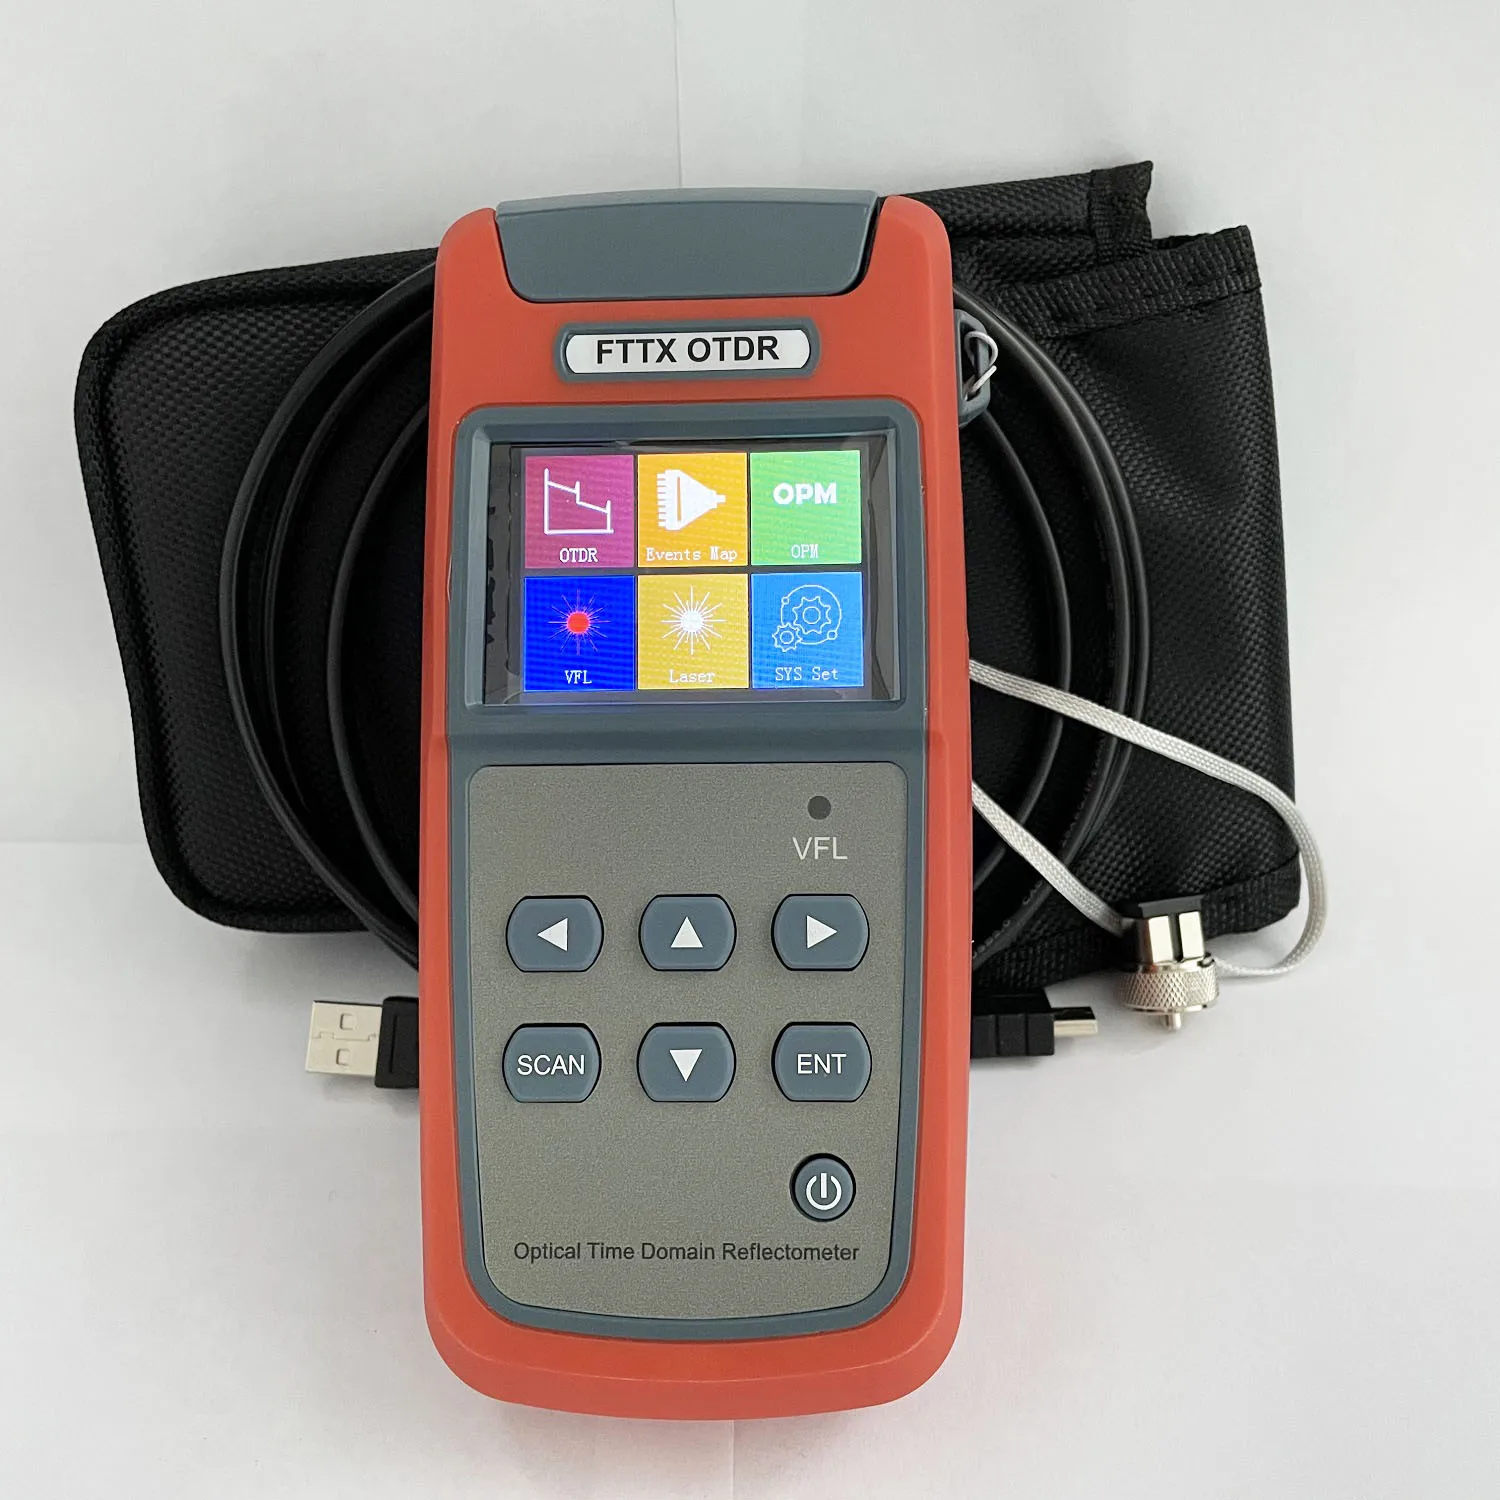 

Portable Cheap OTDR 100% Original Factory Joinwit JW3305A 1310/1550nm 22dB With VFL OPM and iLOM (Event Map) Function